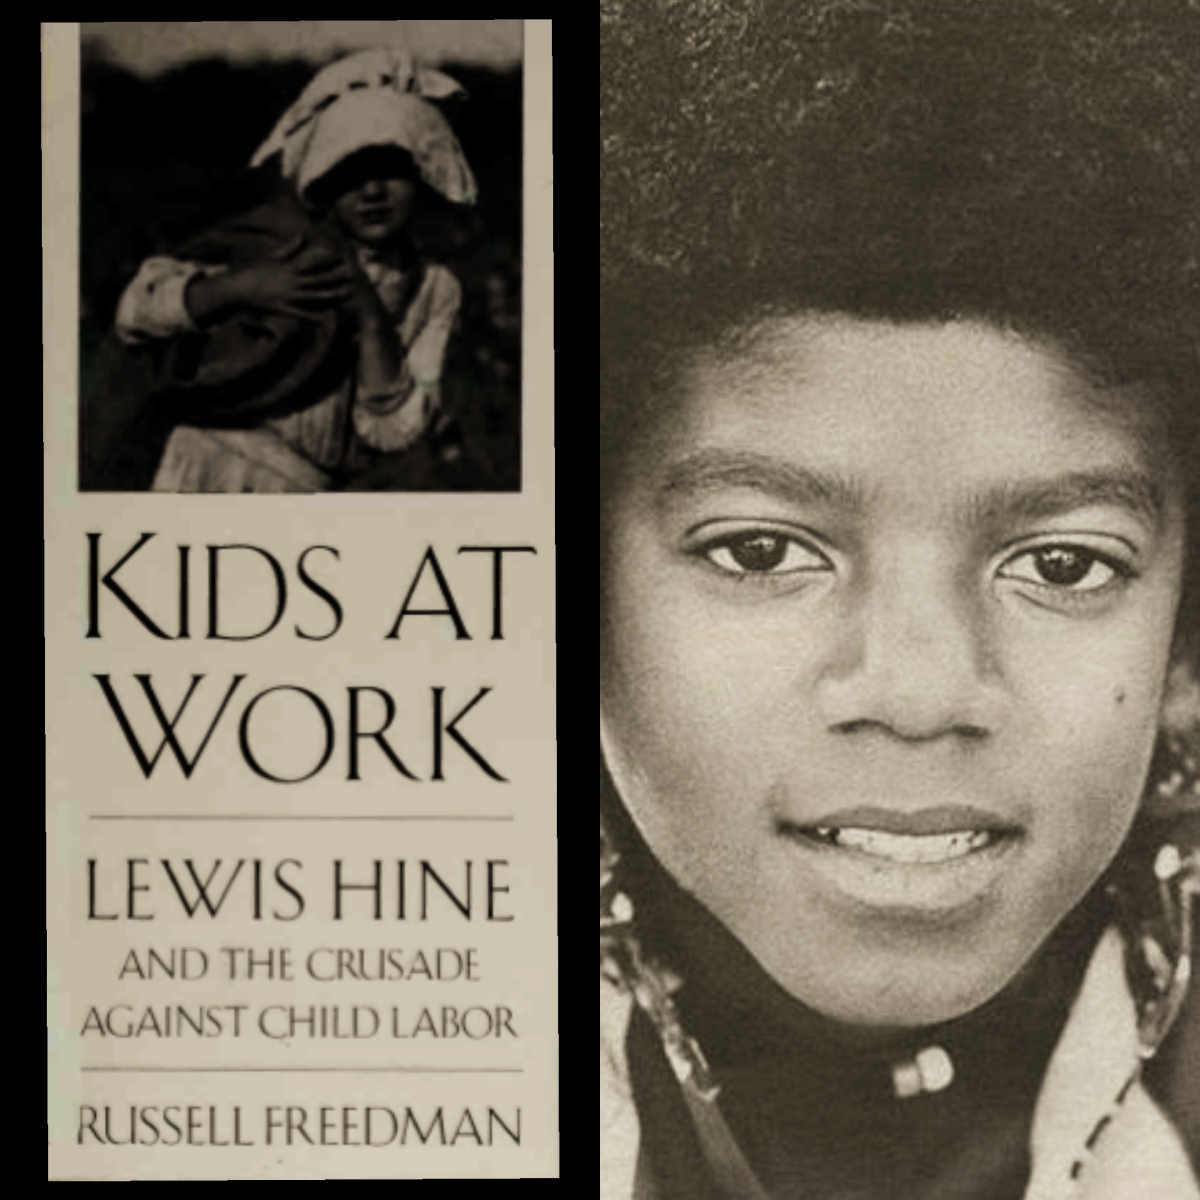 Michael Jackson and Kids At Work, Lewis Hine And The Crusade Against Child Labor – Russell Freedman – 1994.